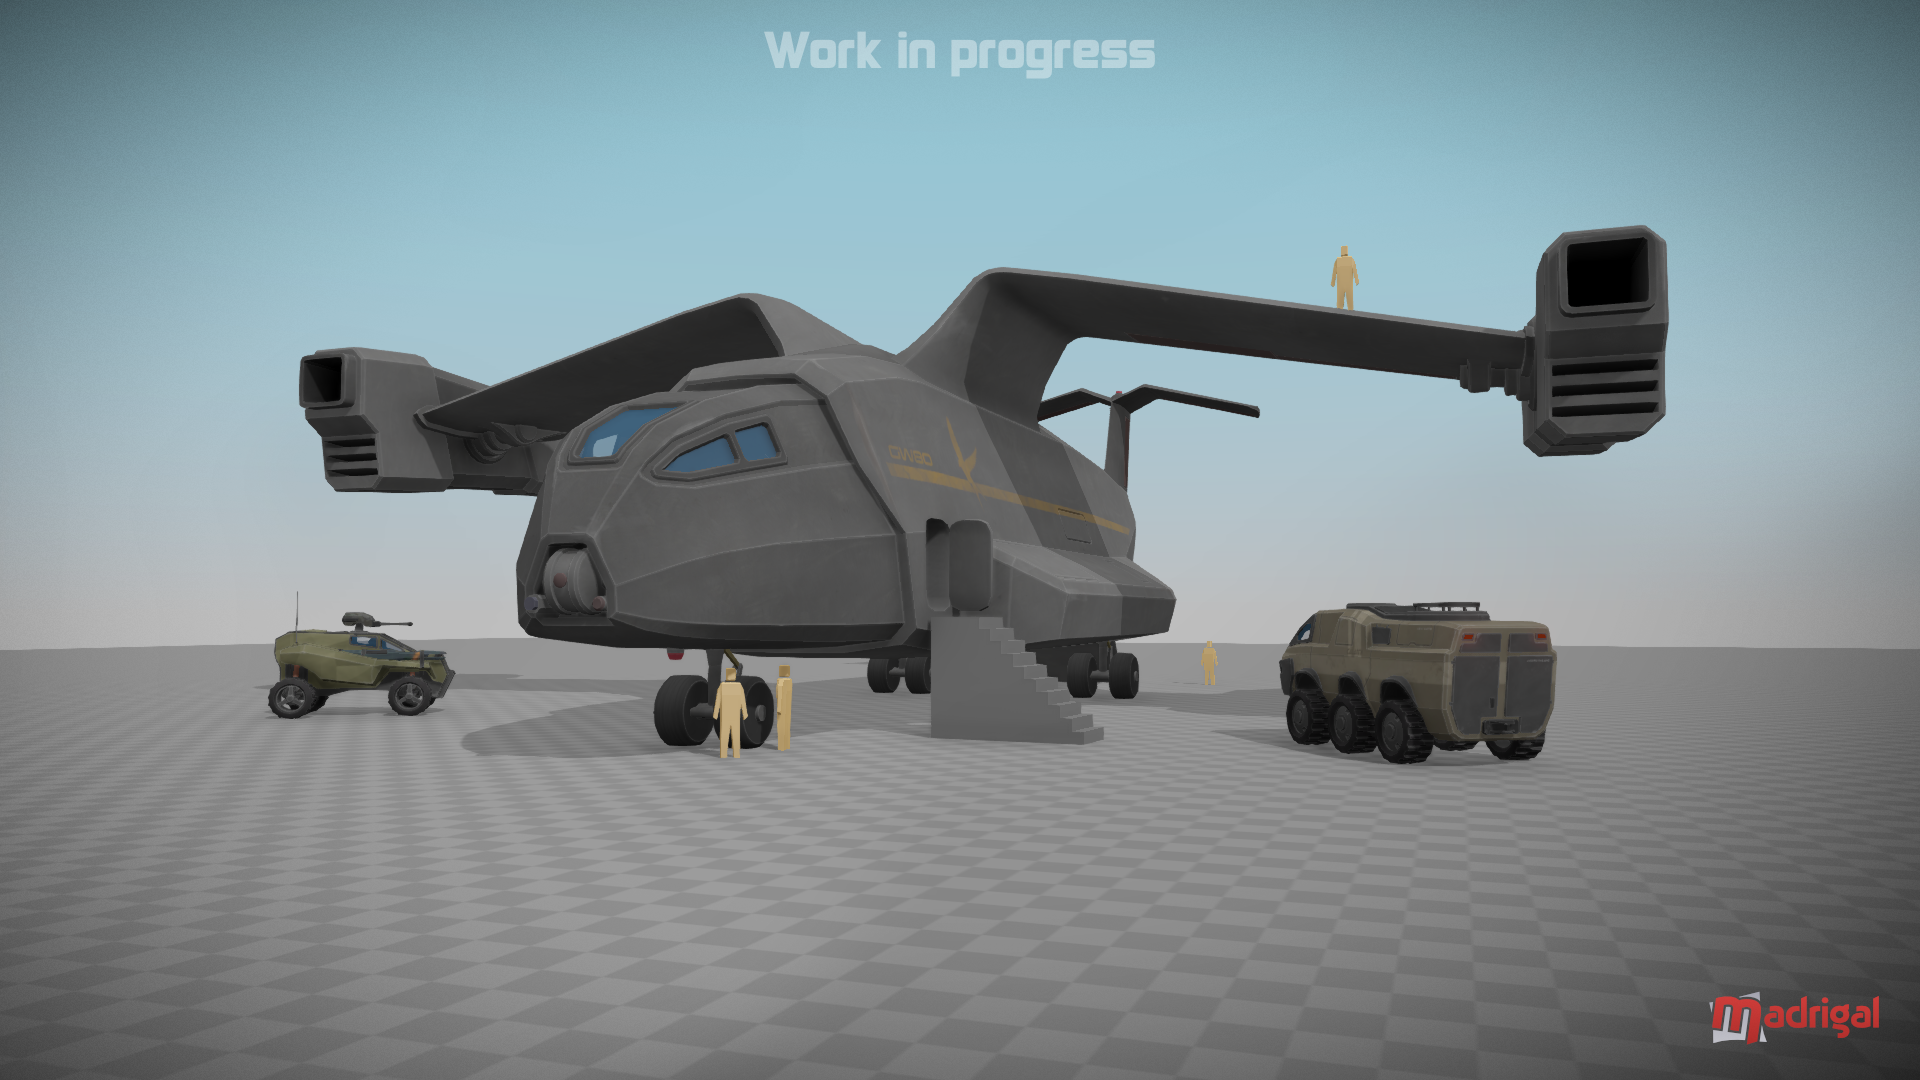 A GW80 'gullwing' dropship being prepped for take-off.